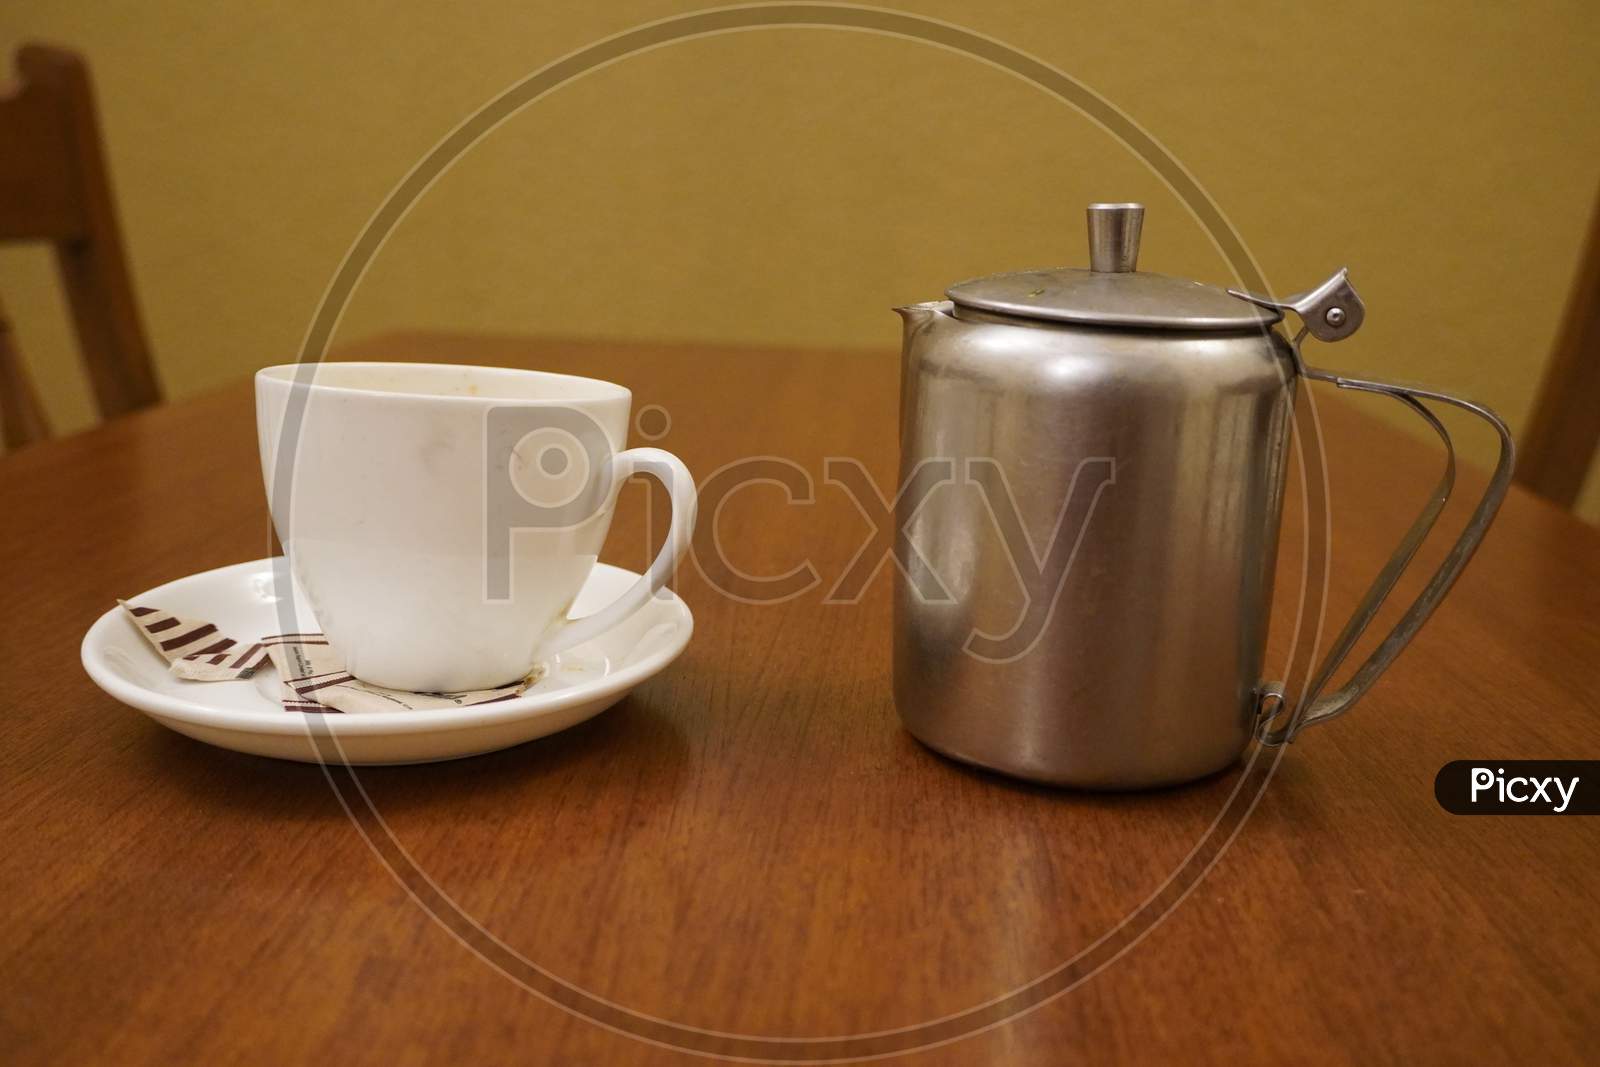 Old Dirty Used Aluminum Tea Pot Kettle With Dirty Used White Tea Mug. Antique Aluminum Kettle With Tea Cup And Empty Used Sugar Sachets. Dirty Coffee And Tea Cup Half Empty On Saucer On Table.